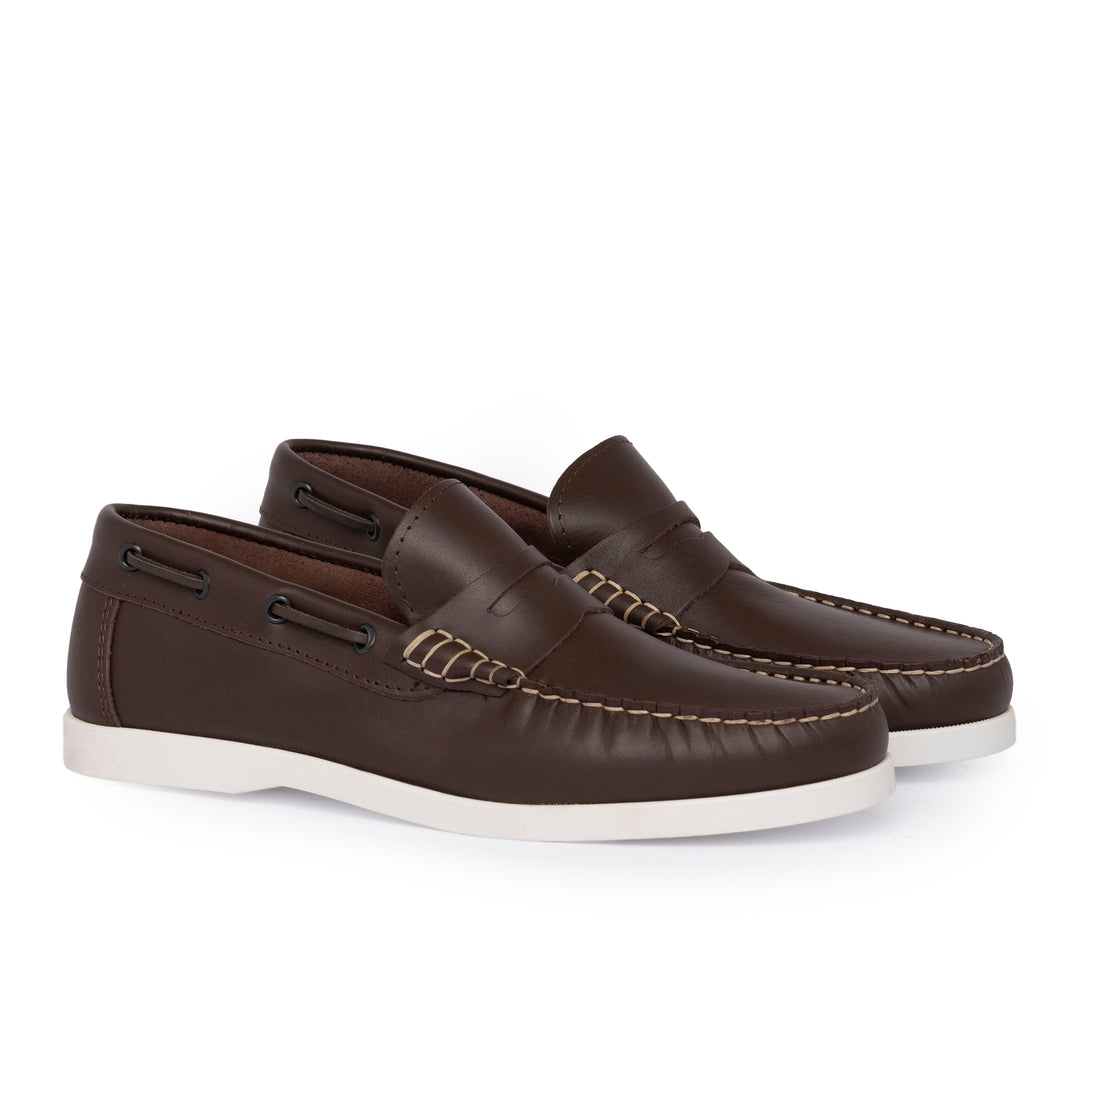 Barca 02 Moccasins with Buckle in Dark Brown Leather